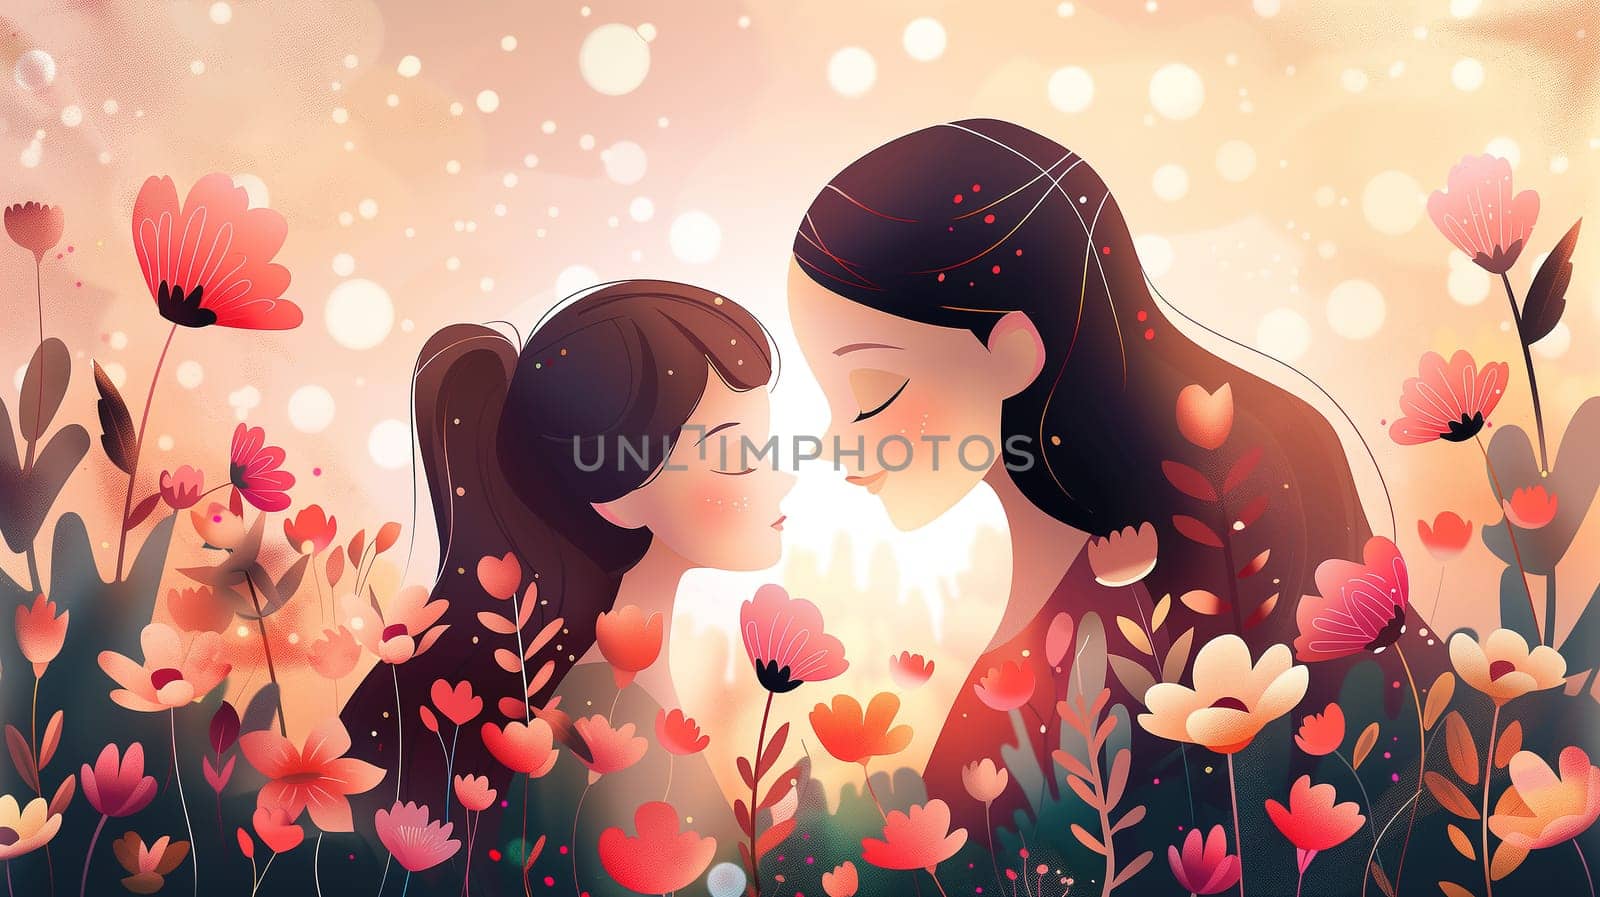 A couple romantically kissing amidst a field of colorful flowers on a sunny day, surrounded by natures beauty and serenity. The intimate moment captures the essence of love and togetherness.